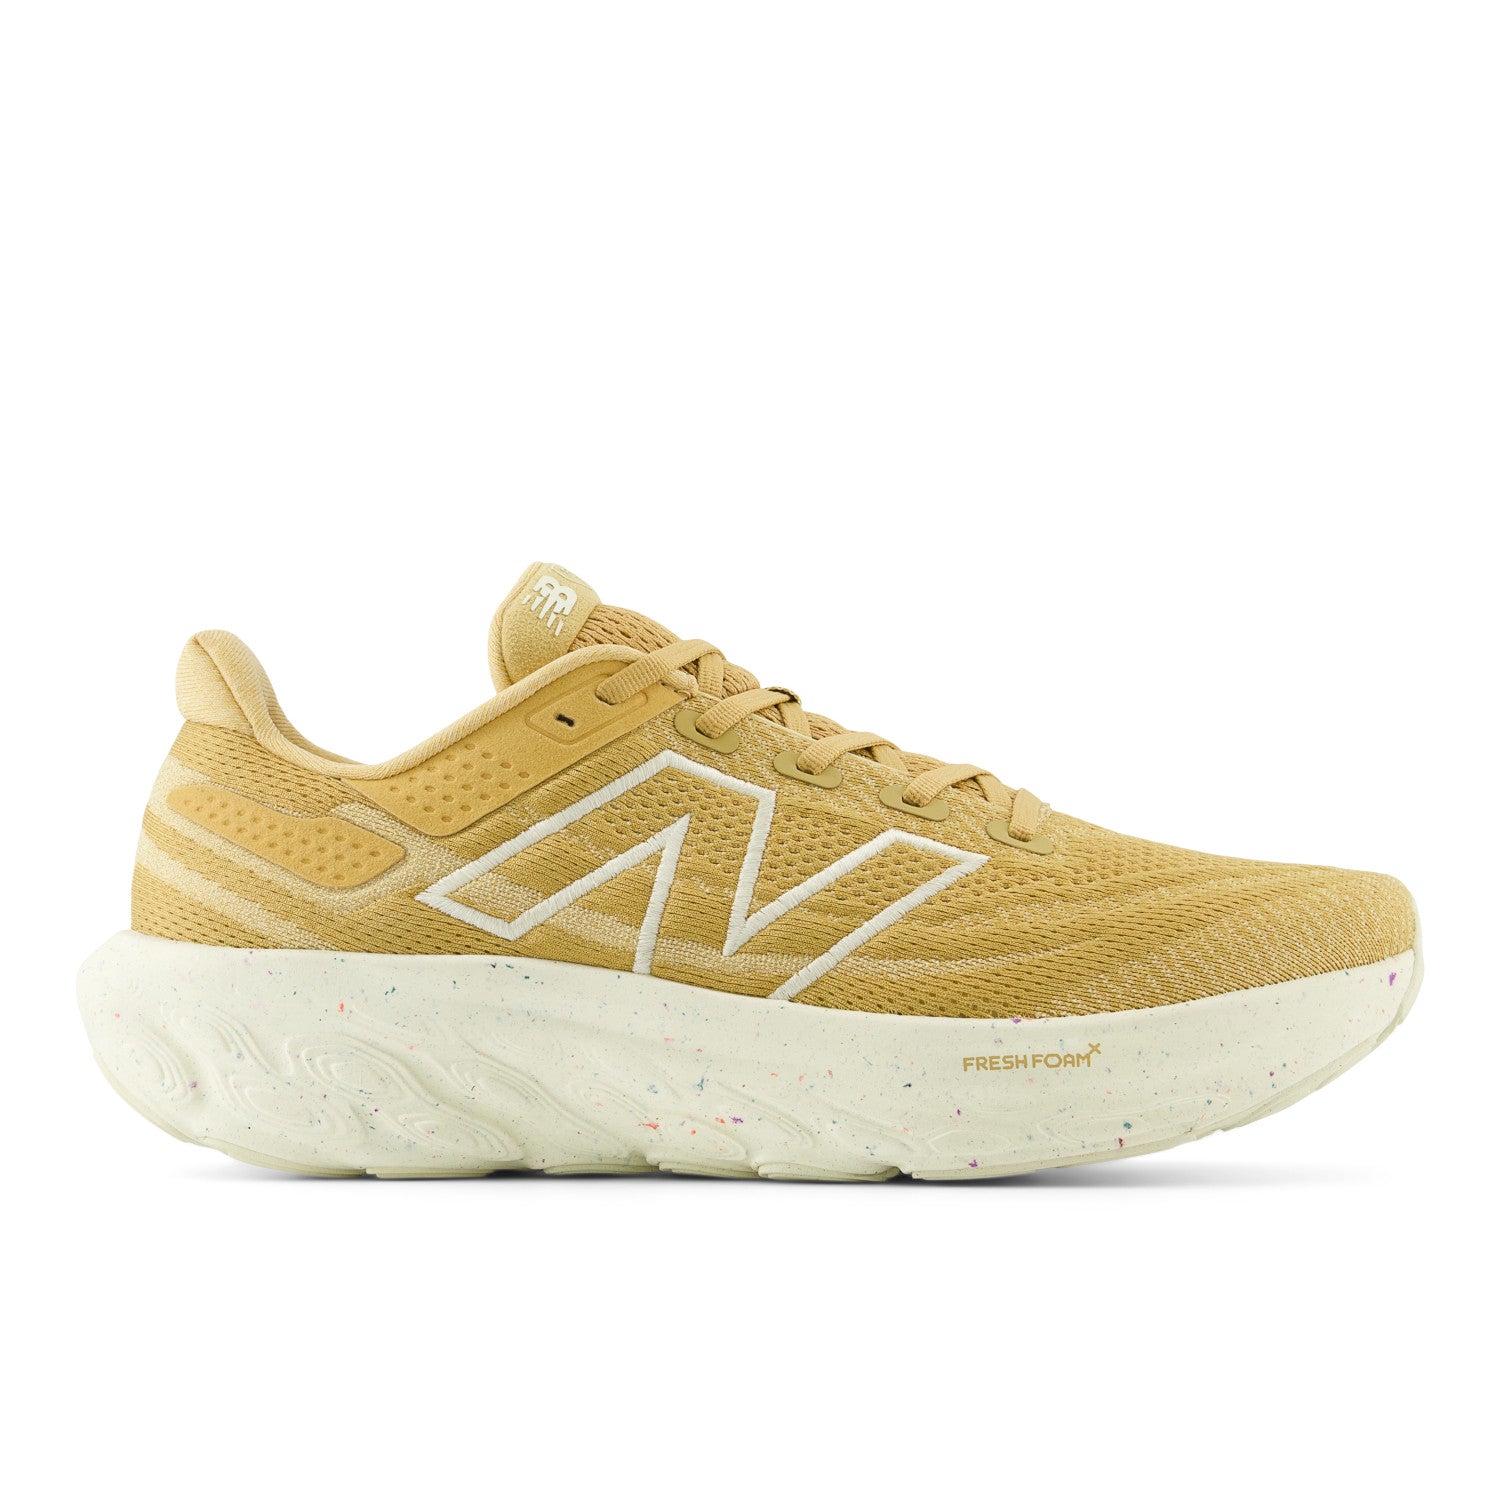 NEW BALANCE MEN'S 1080 V13 - D - 13D DOLCE WITH ANGORA AND GOLD 6.0